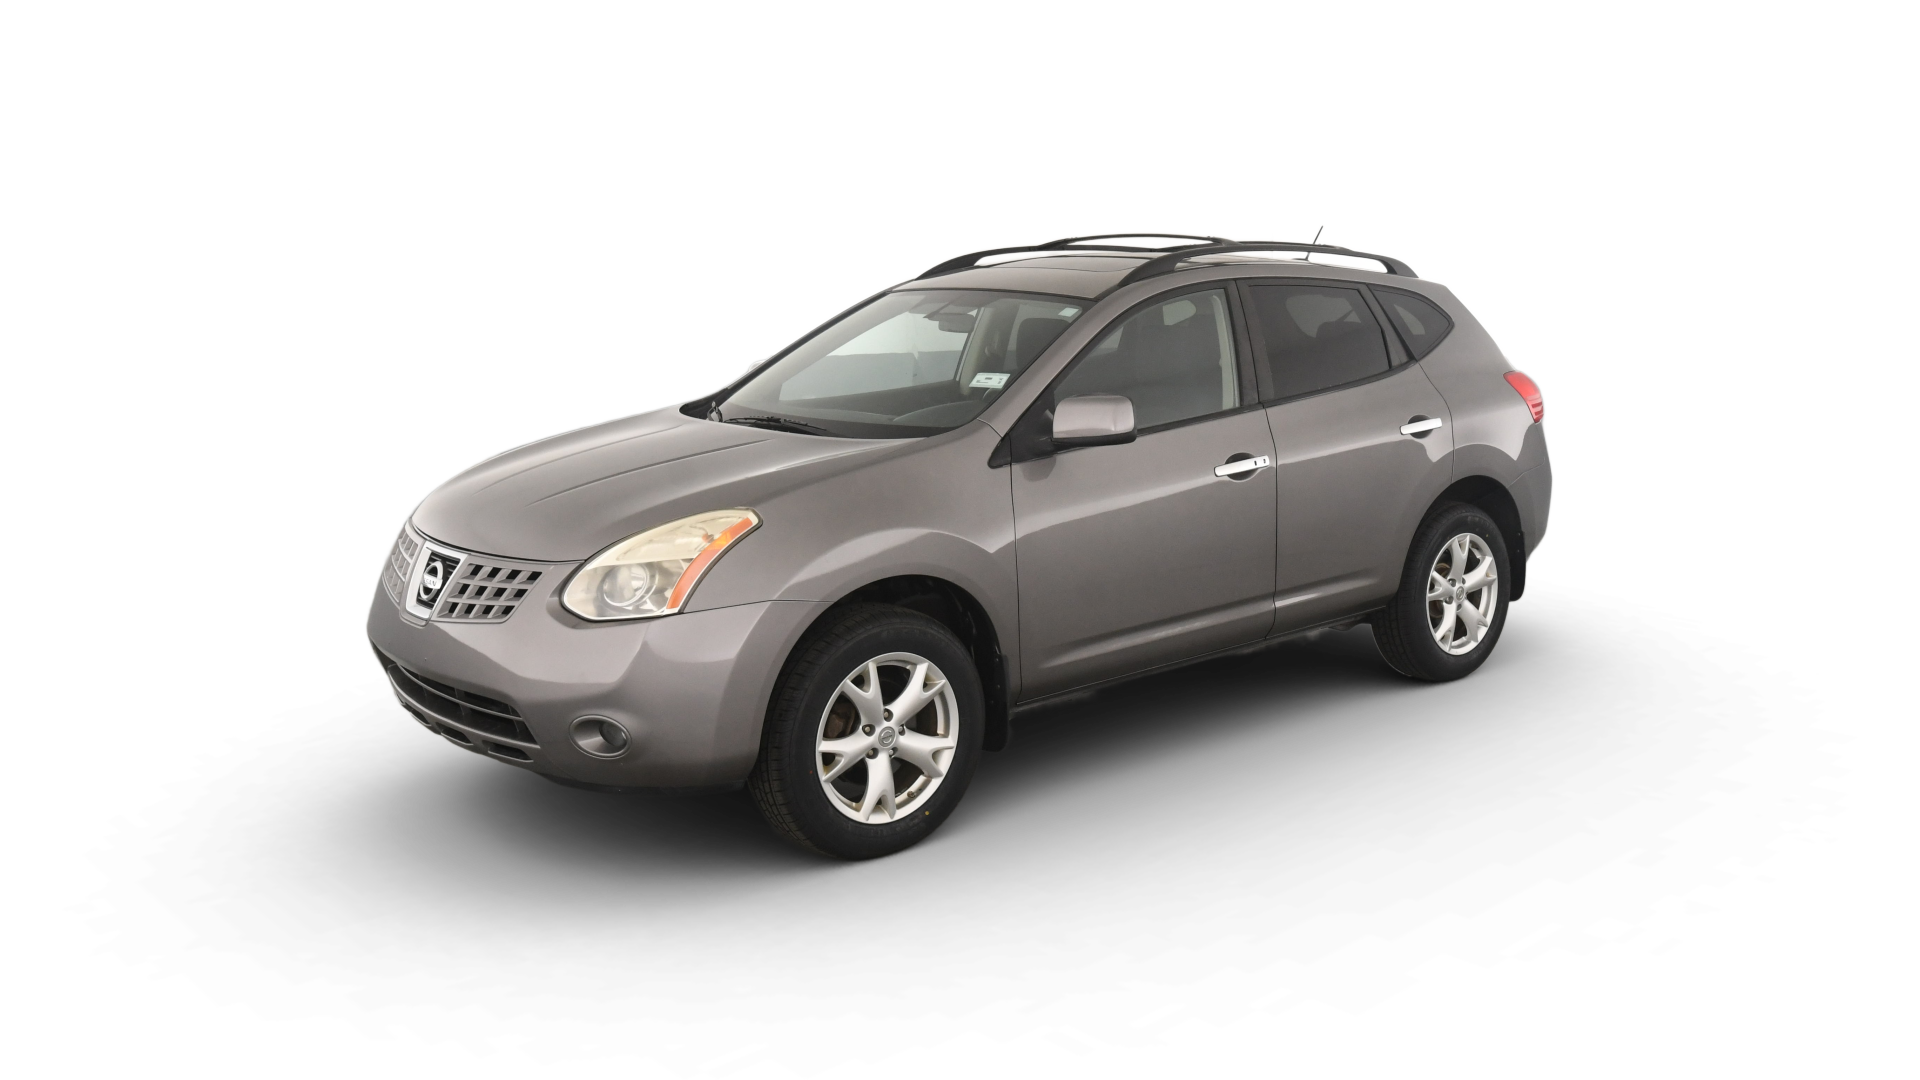 Used 2010 Nissan Rogue For Sale Online | Carvana